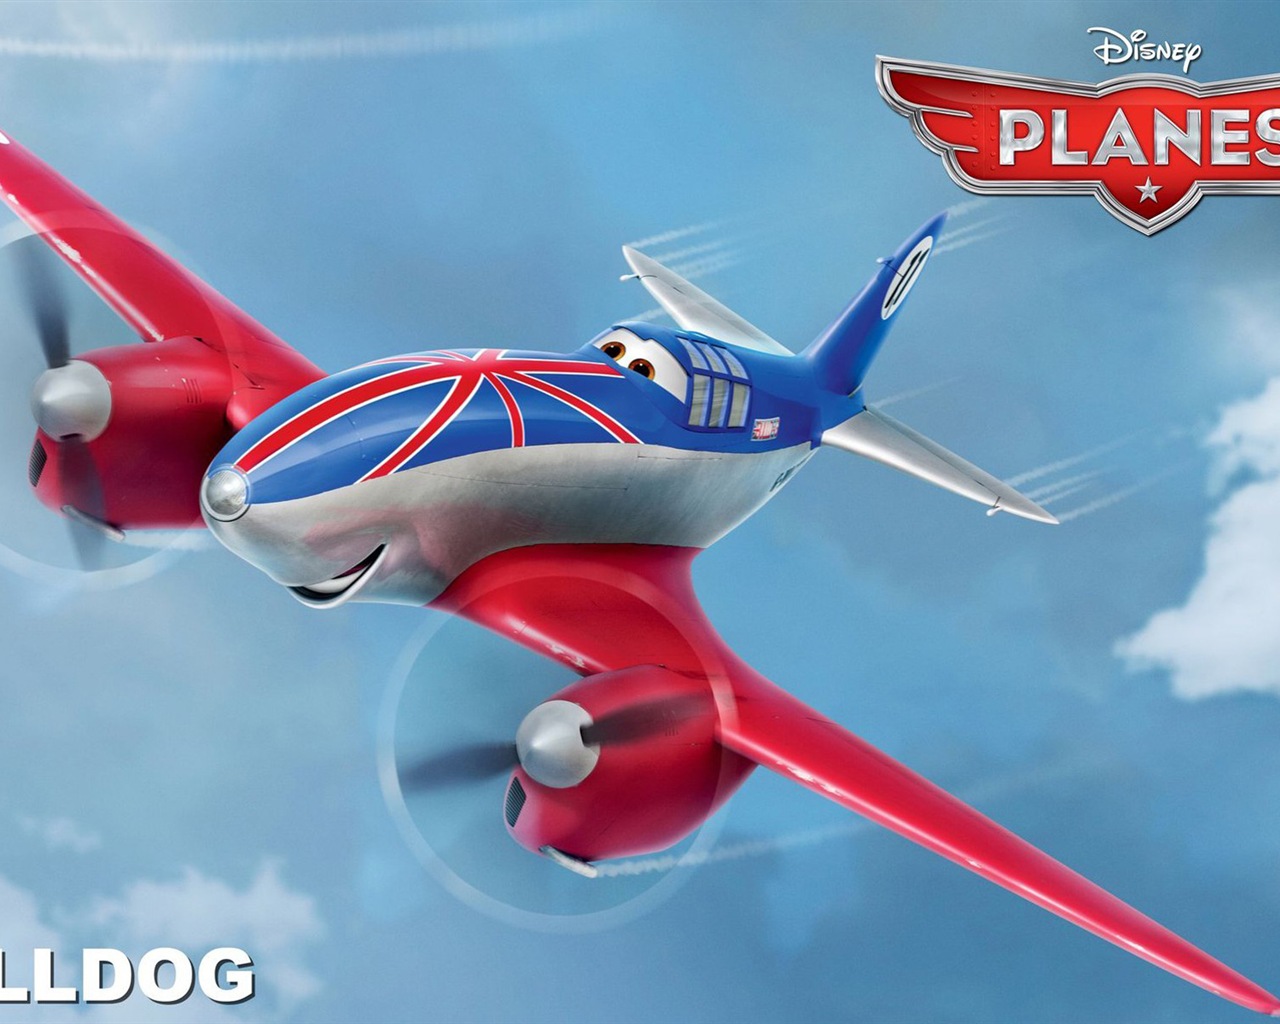 Planes 2013 HD wallpapers #18 - 1280x1024